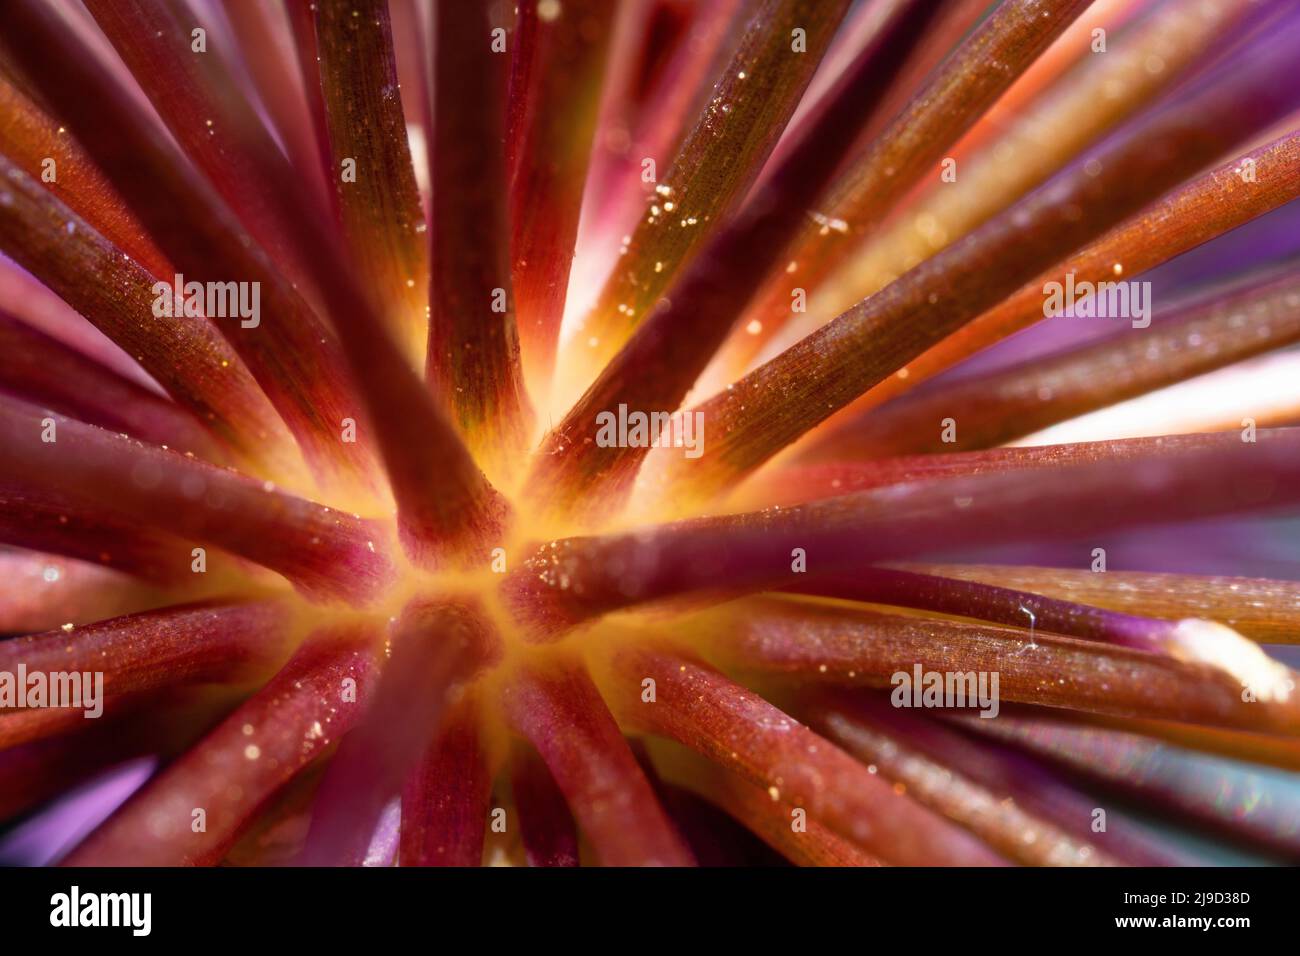 Detail view of the stamm of a blossom in inflorescent red color Stock Photo